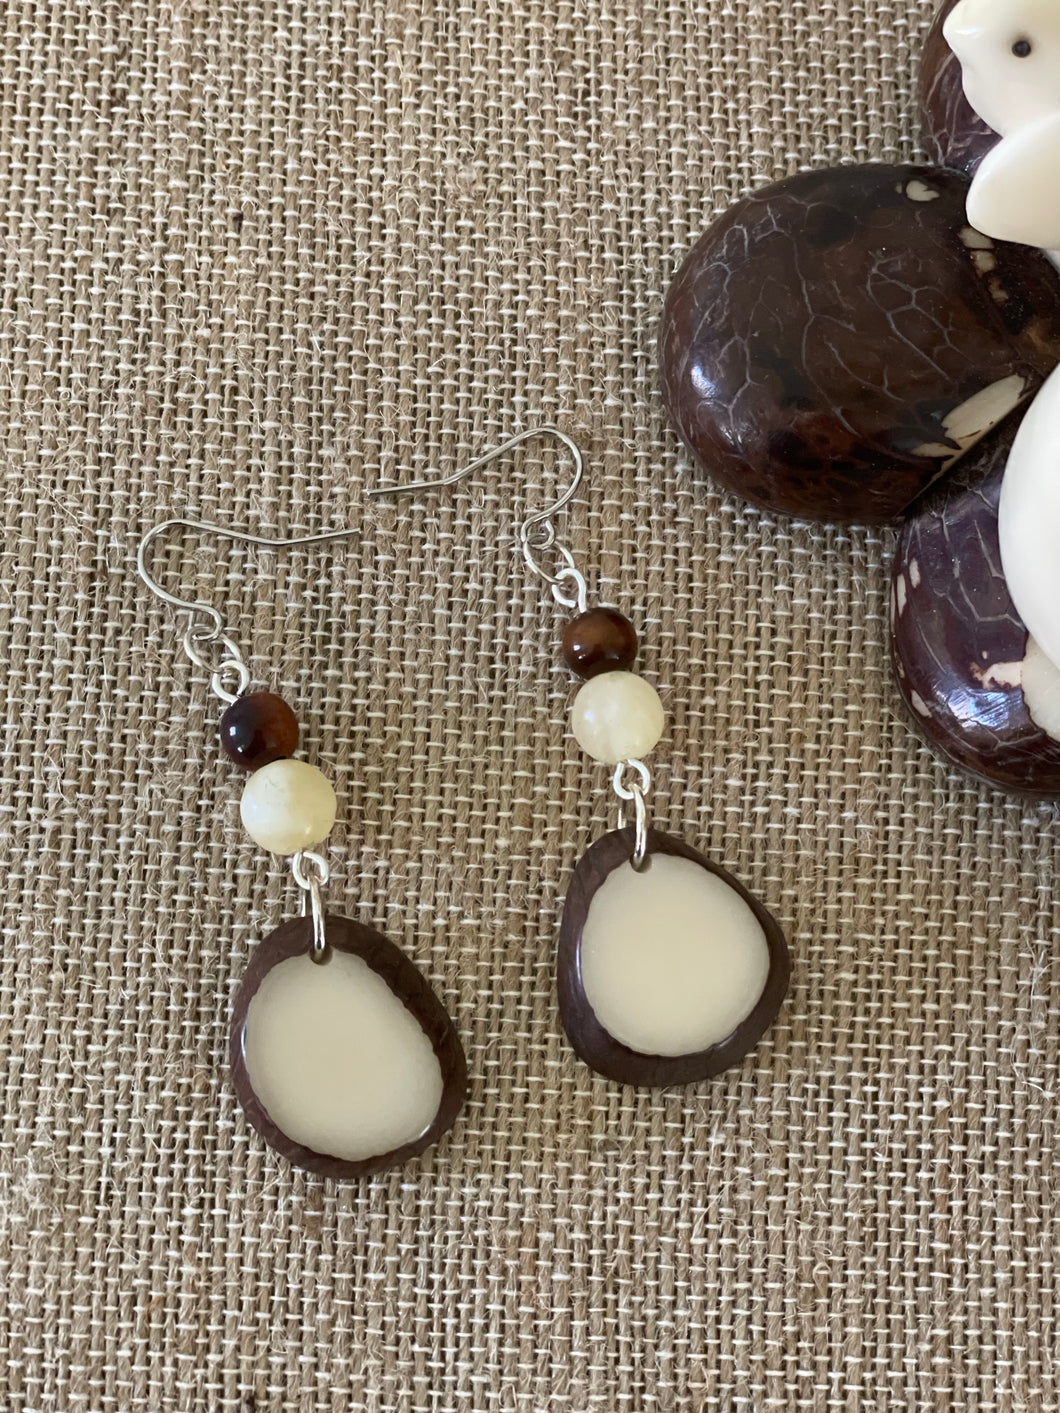 Ivory and Brown Tagua Nut Earrings